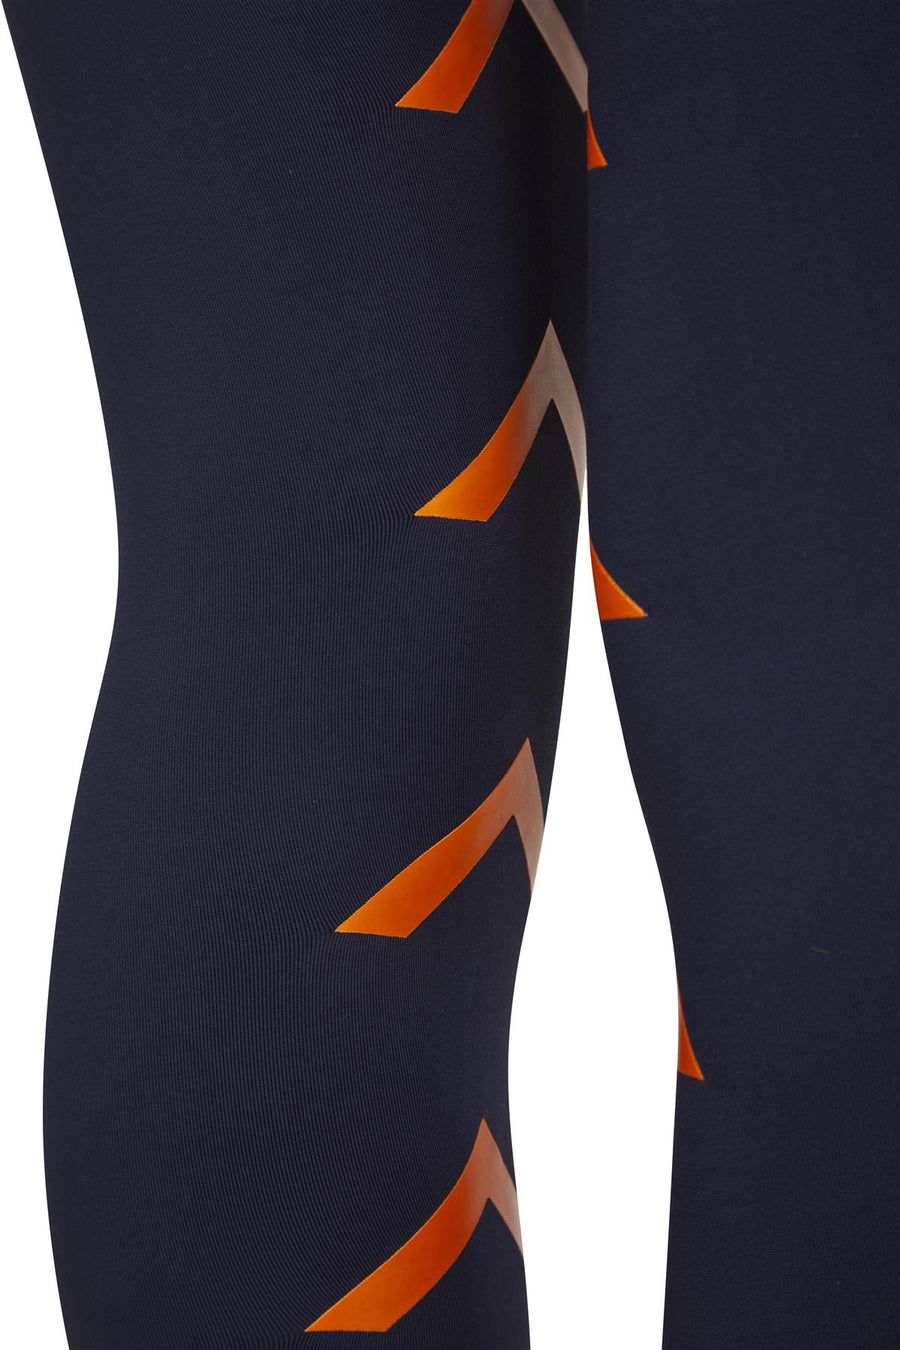 Bow And Arrow Tabah Riding Leggings Navy and Orange